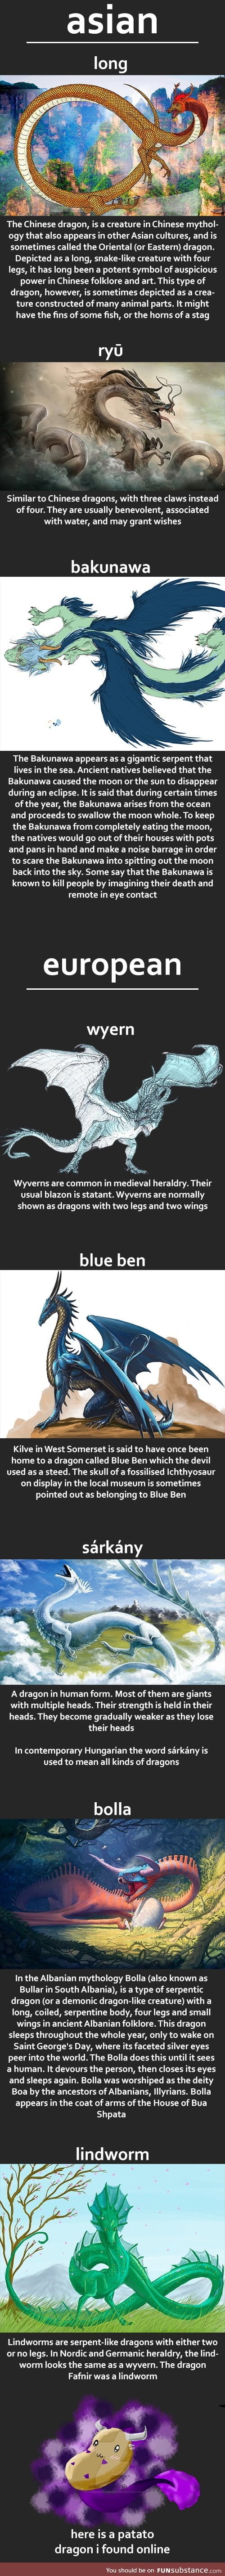 Some dragon types from different folklores!